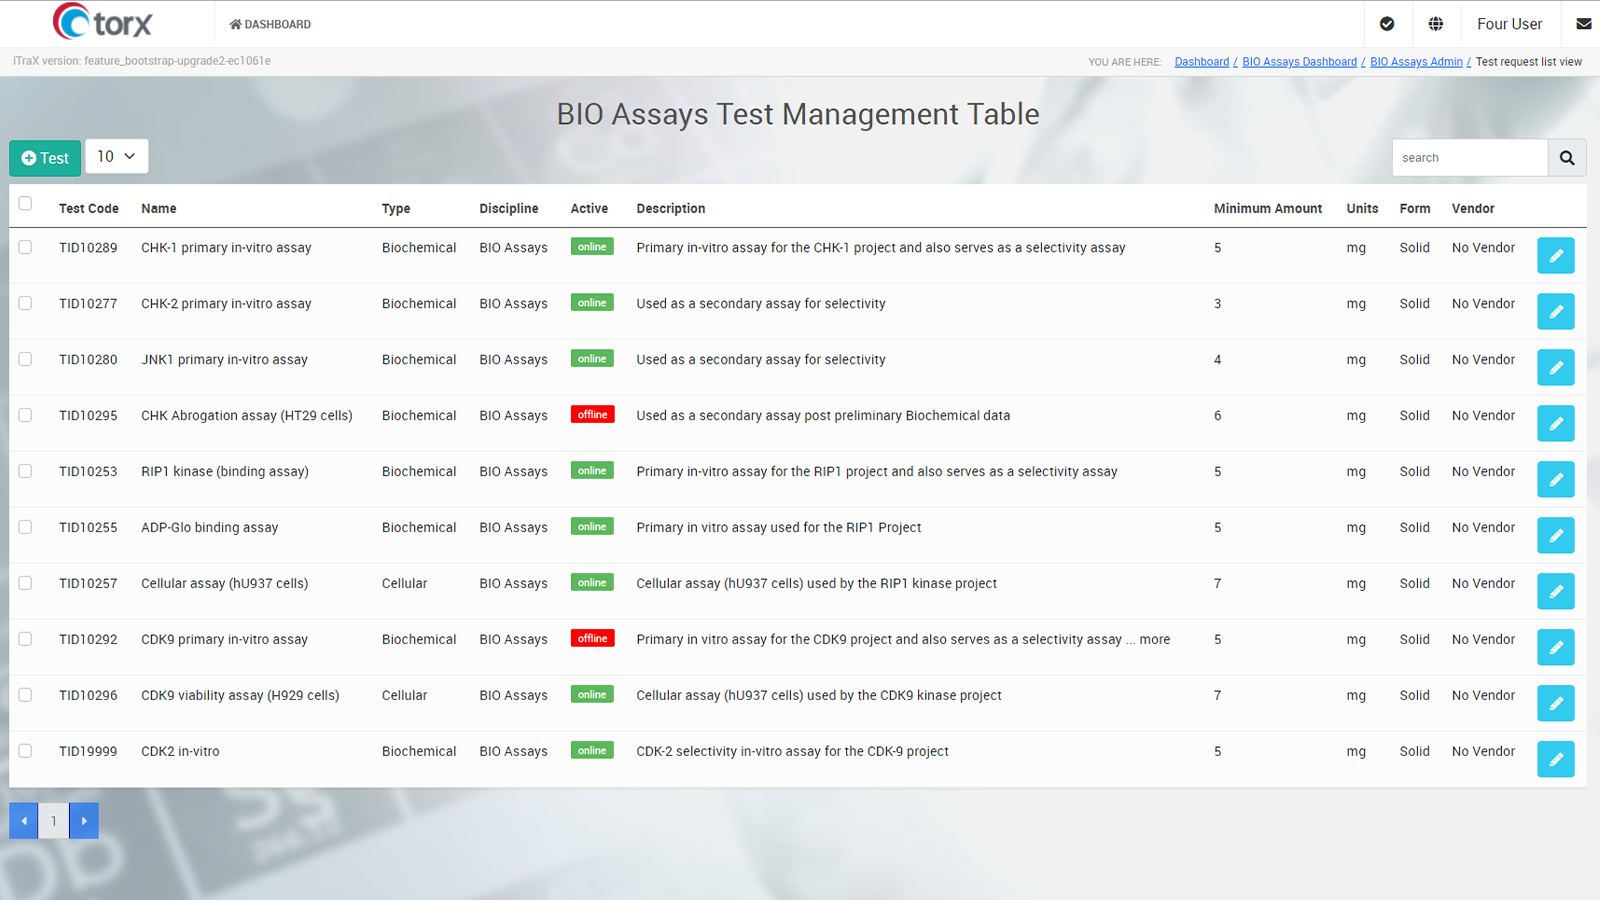 Figure 3. Torx Test - Assay teams can display and manage an up-to-date table of all assays available to chemists, including sample requirements, in a simple web interface.